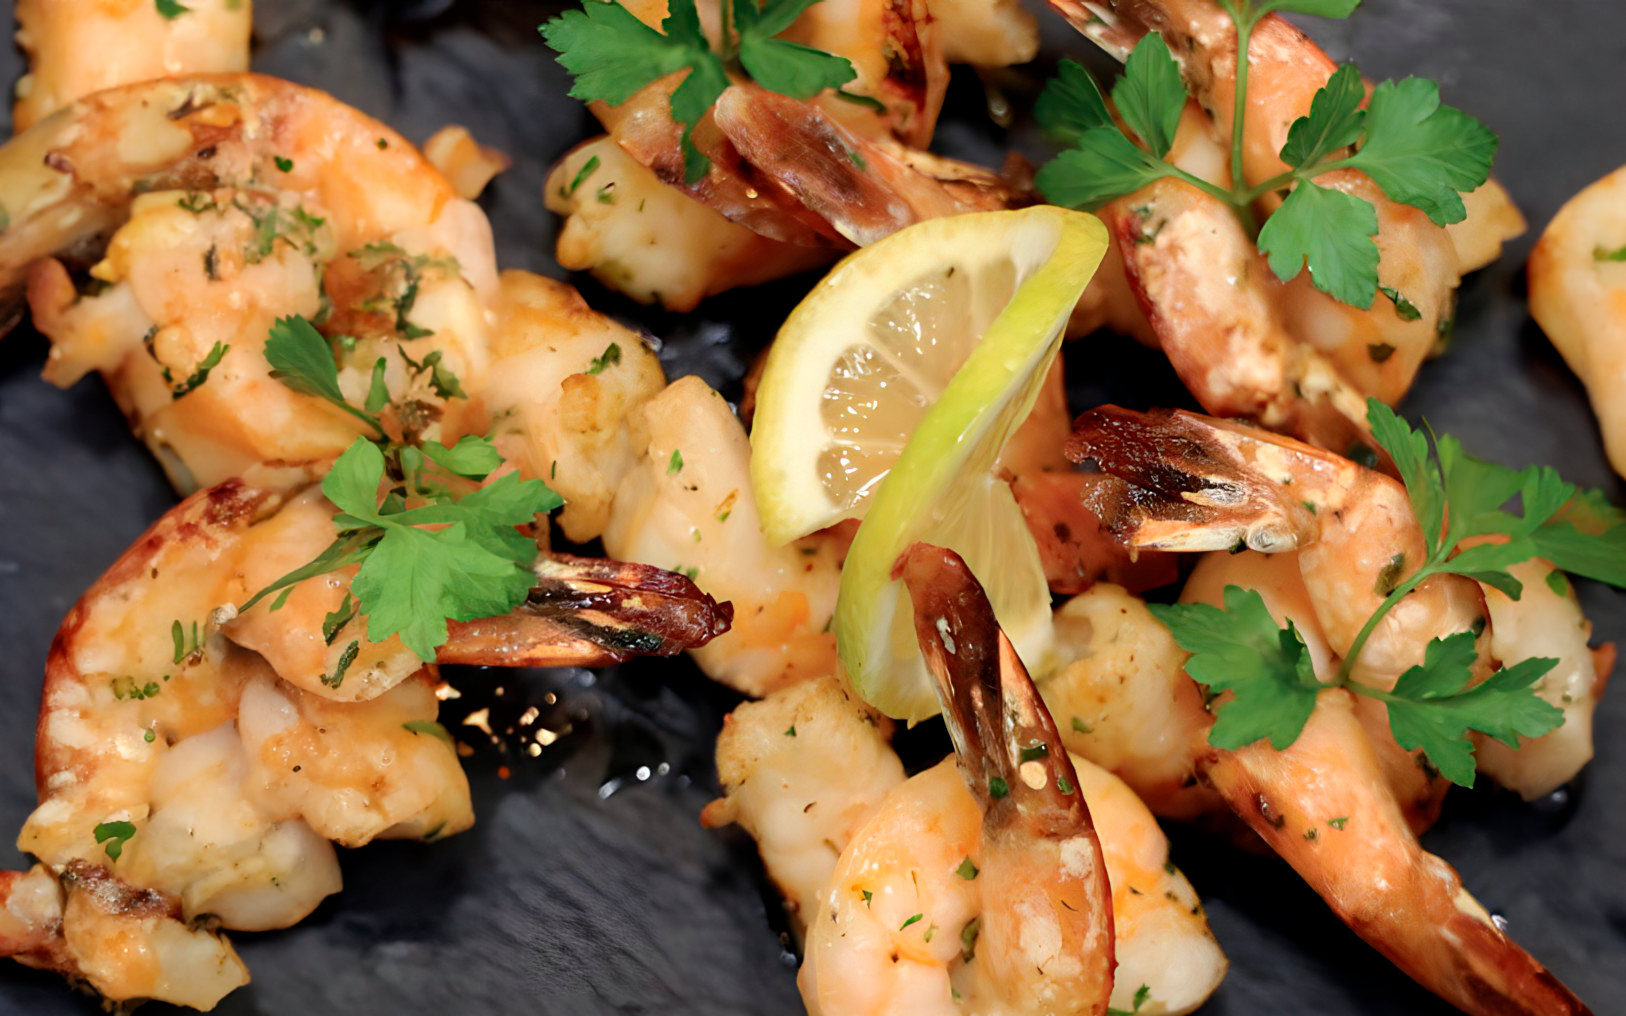 Grilled Shrimp With Garlic Butter and Herbs